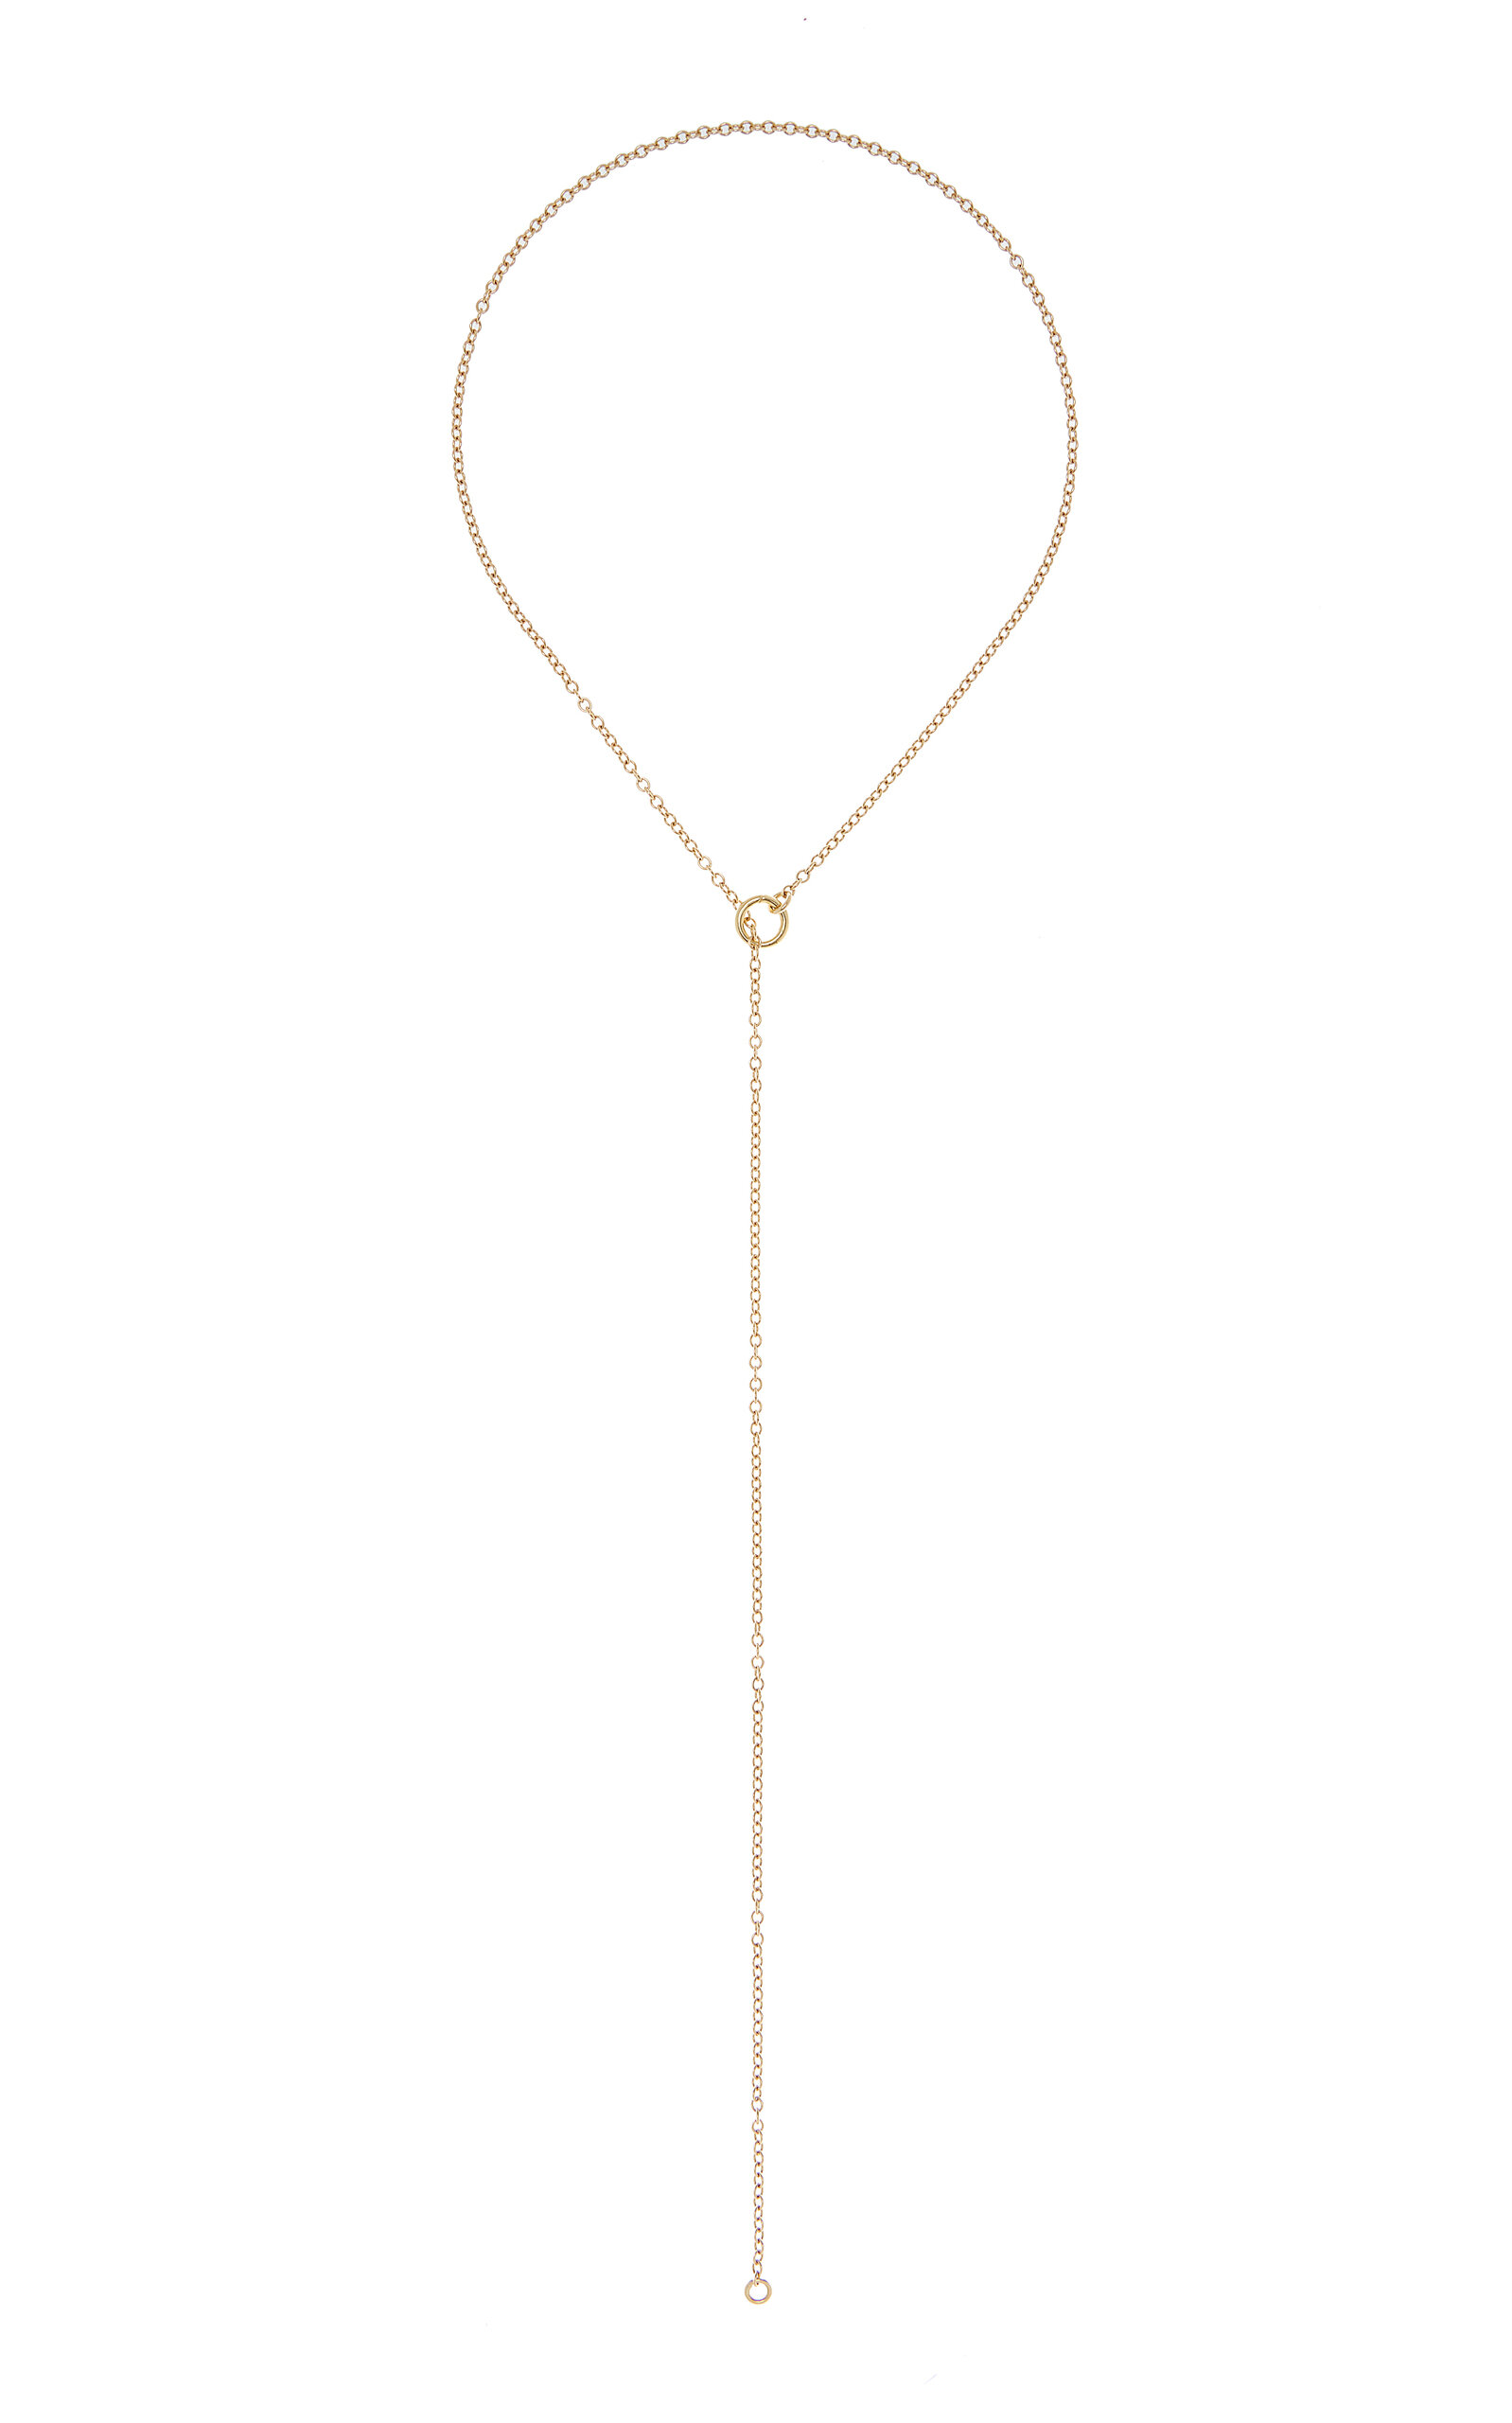 Jane Taylor 14k Yellow Gold O-link Chain Necklace